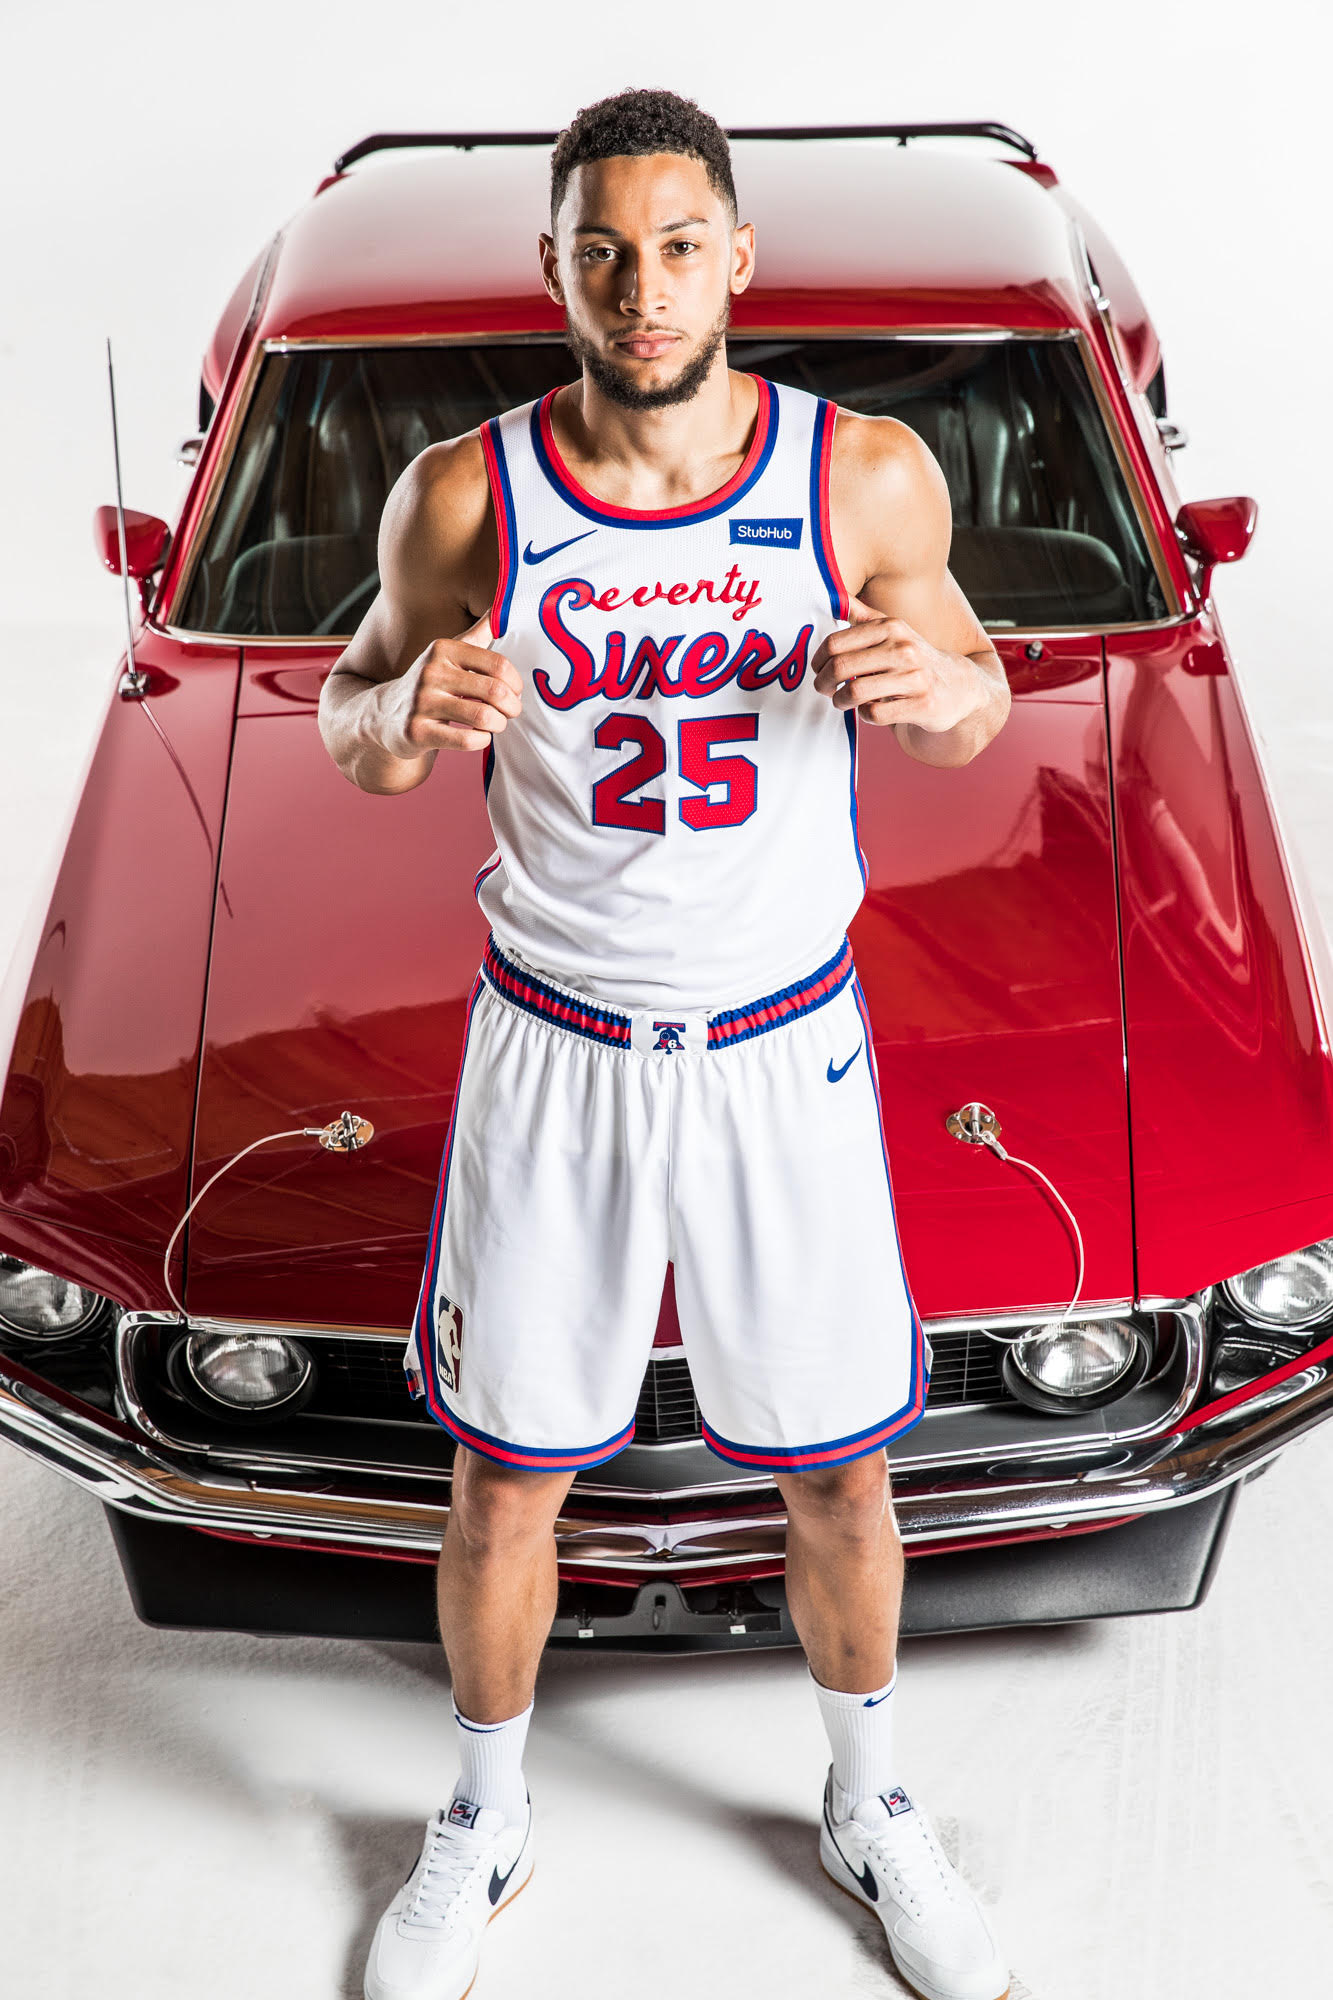 First look at Sixers' new City Edition jerseys draw mixed reactions